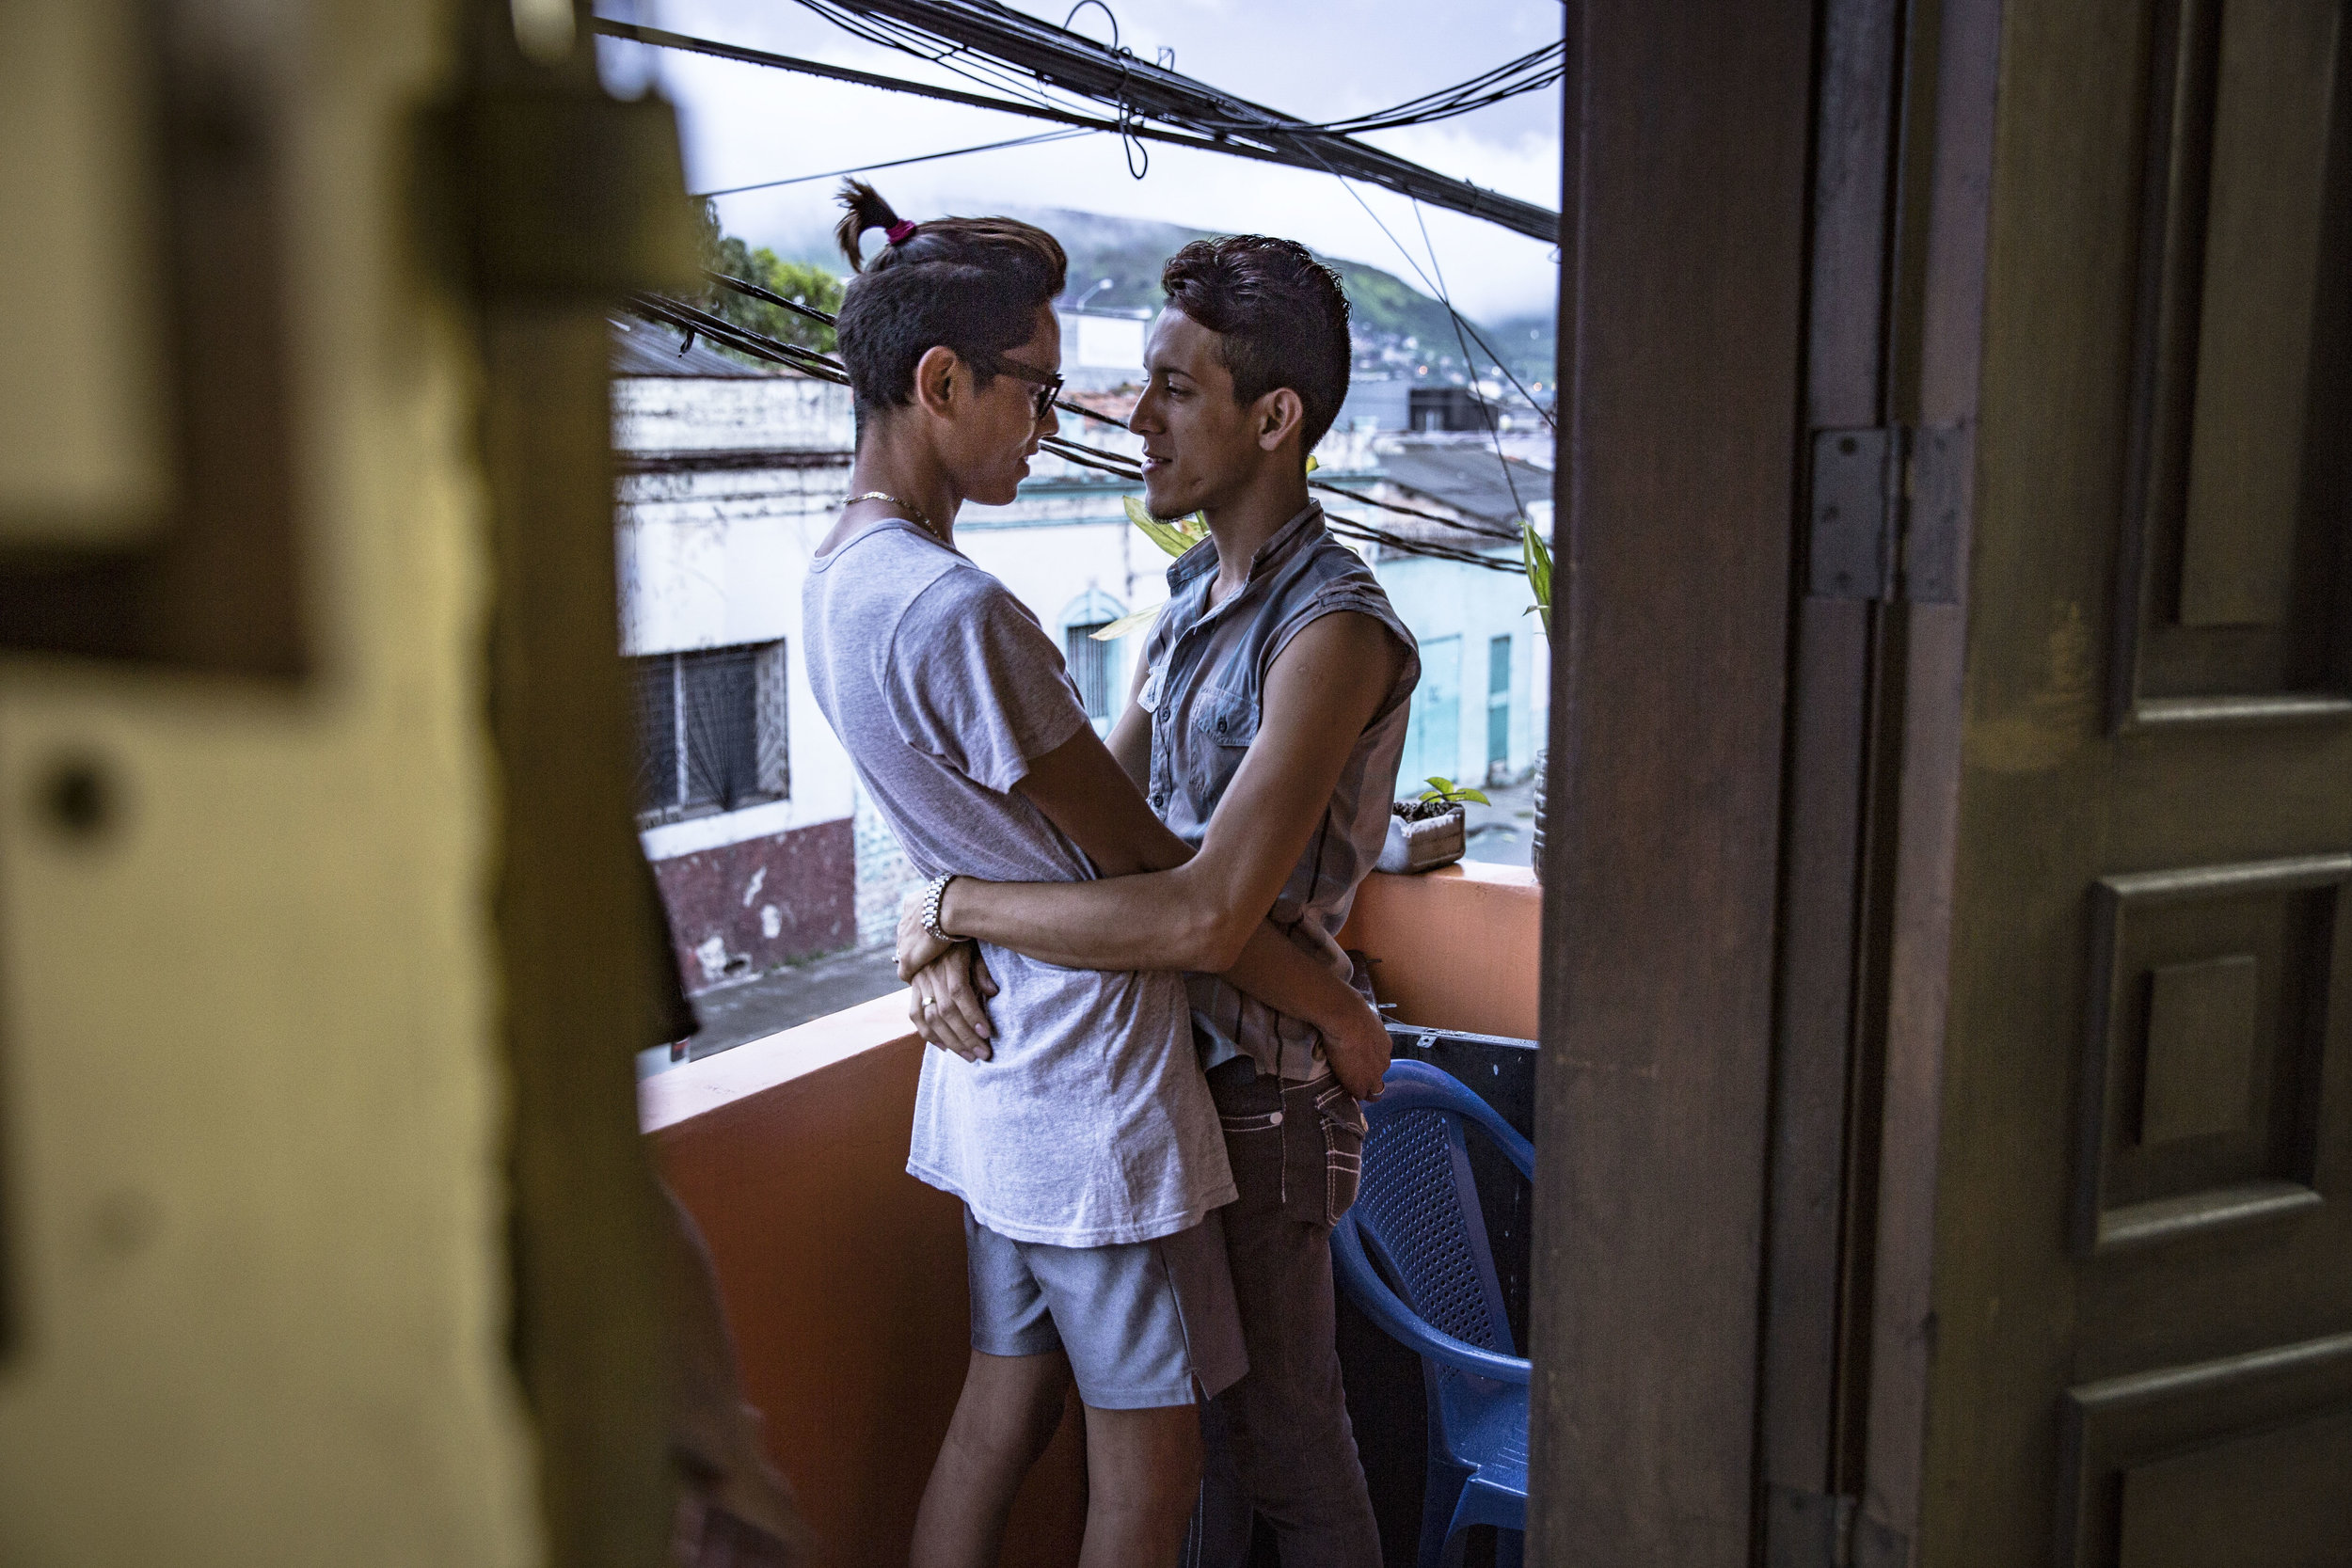  A couple in the permises of Arcoiris, the LGBT organization that is a space that aims to reunite homosexuals and transgenders in Tegucigalpa in a place where they can spend time feeling relatively safe. 